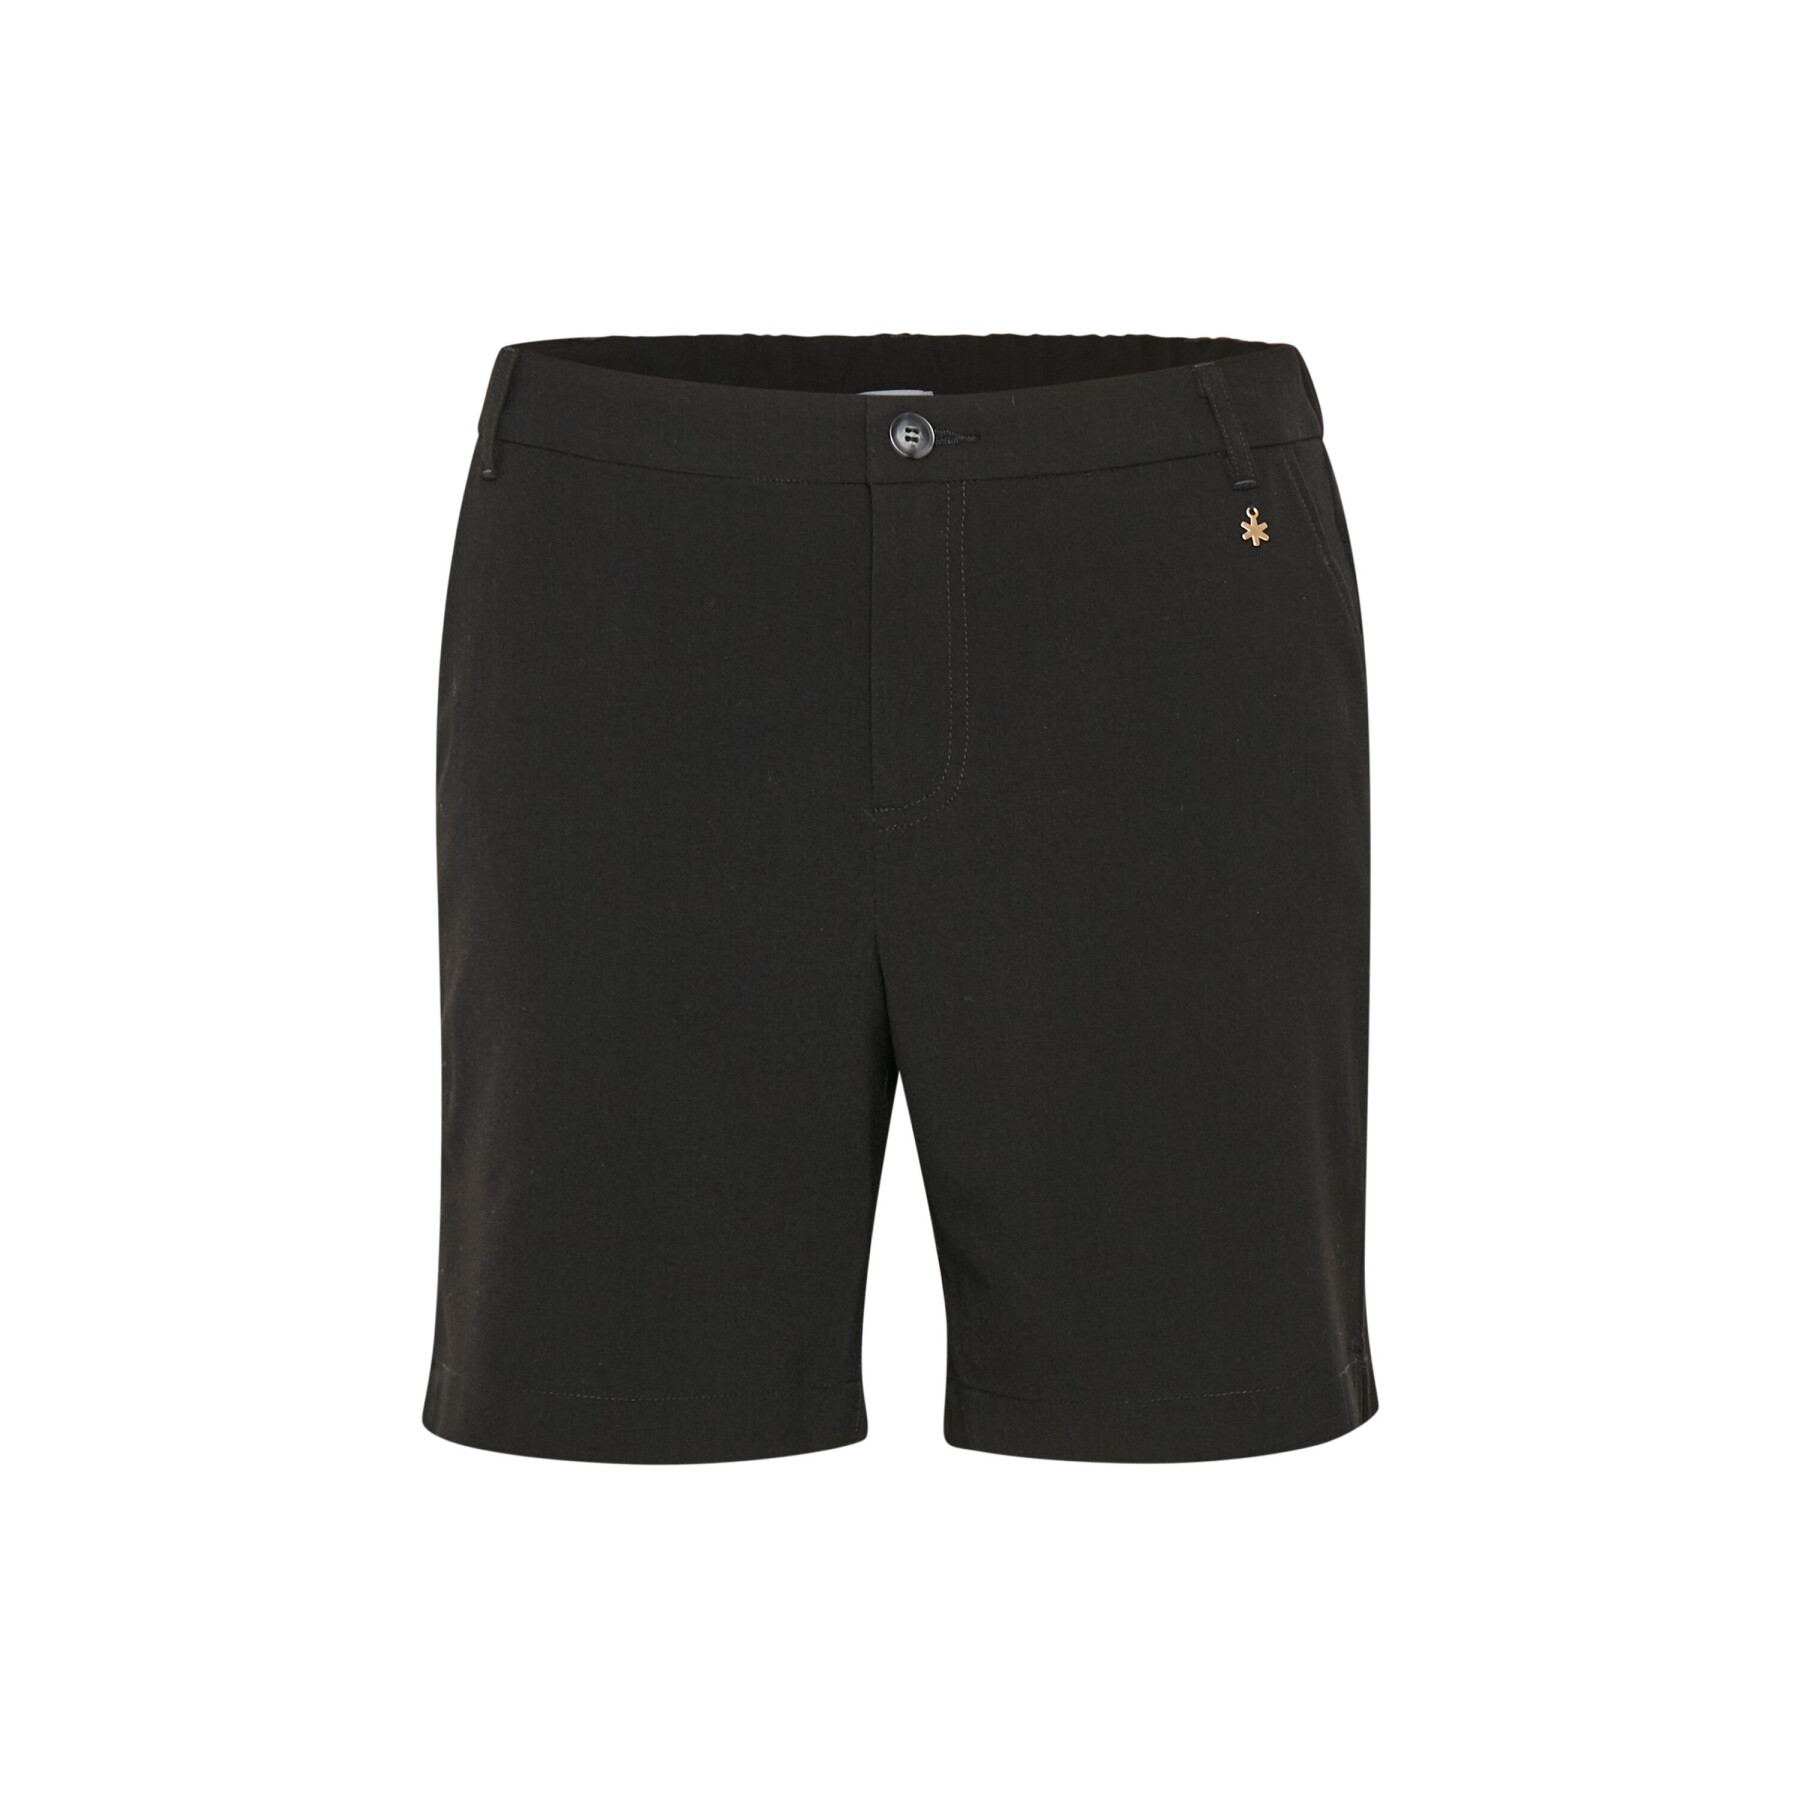 Women's shorts CULTURE Vicky